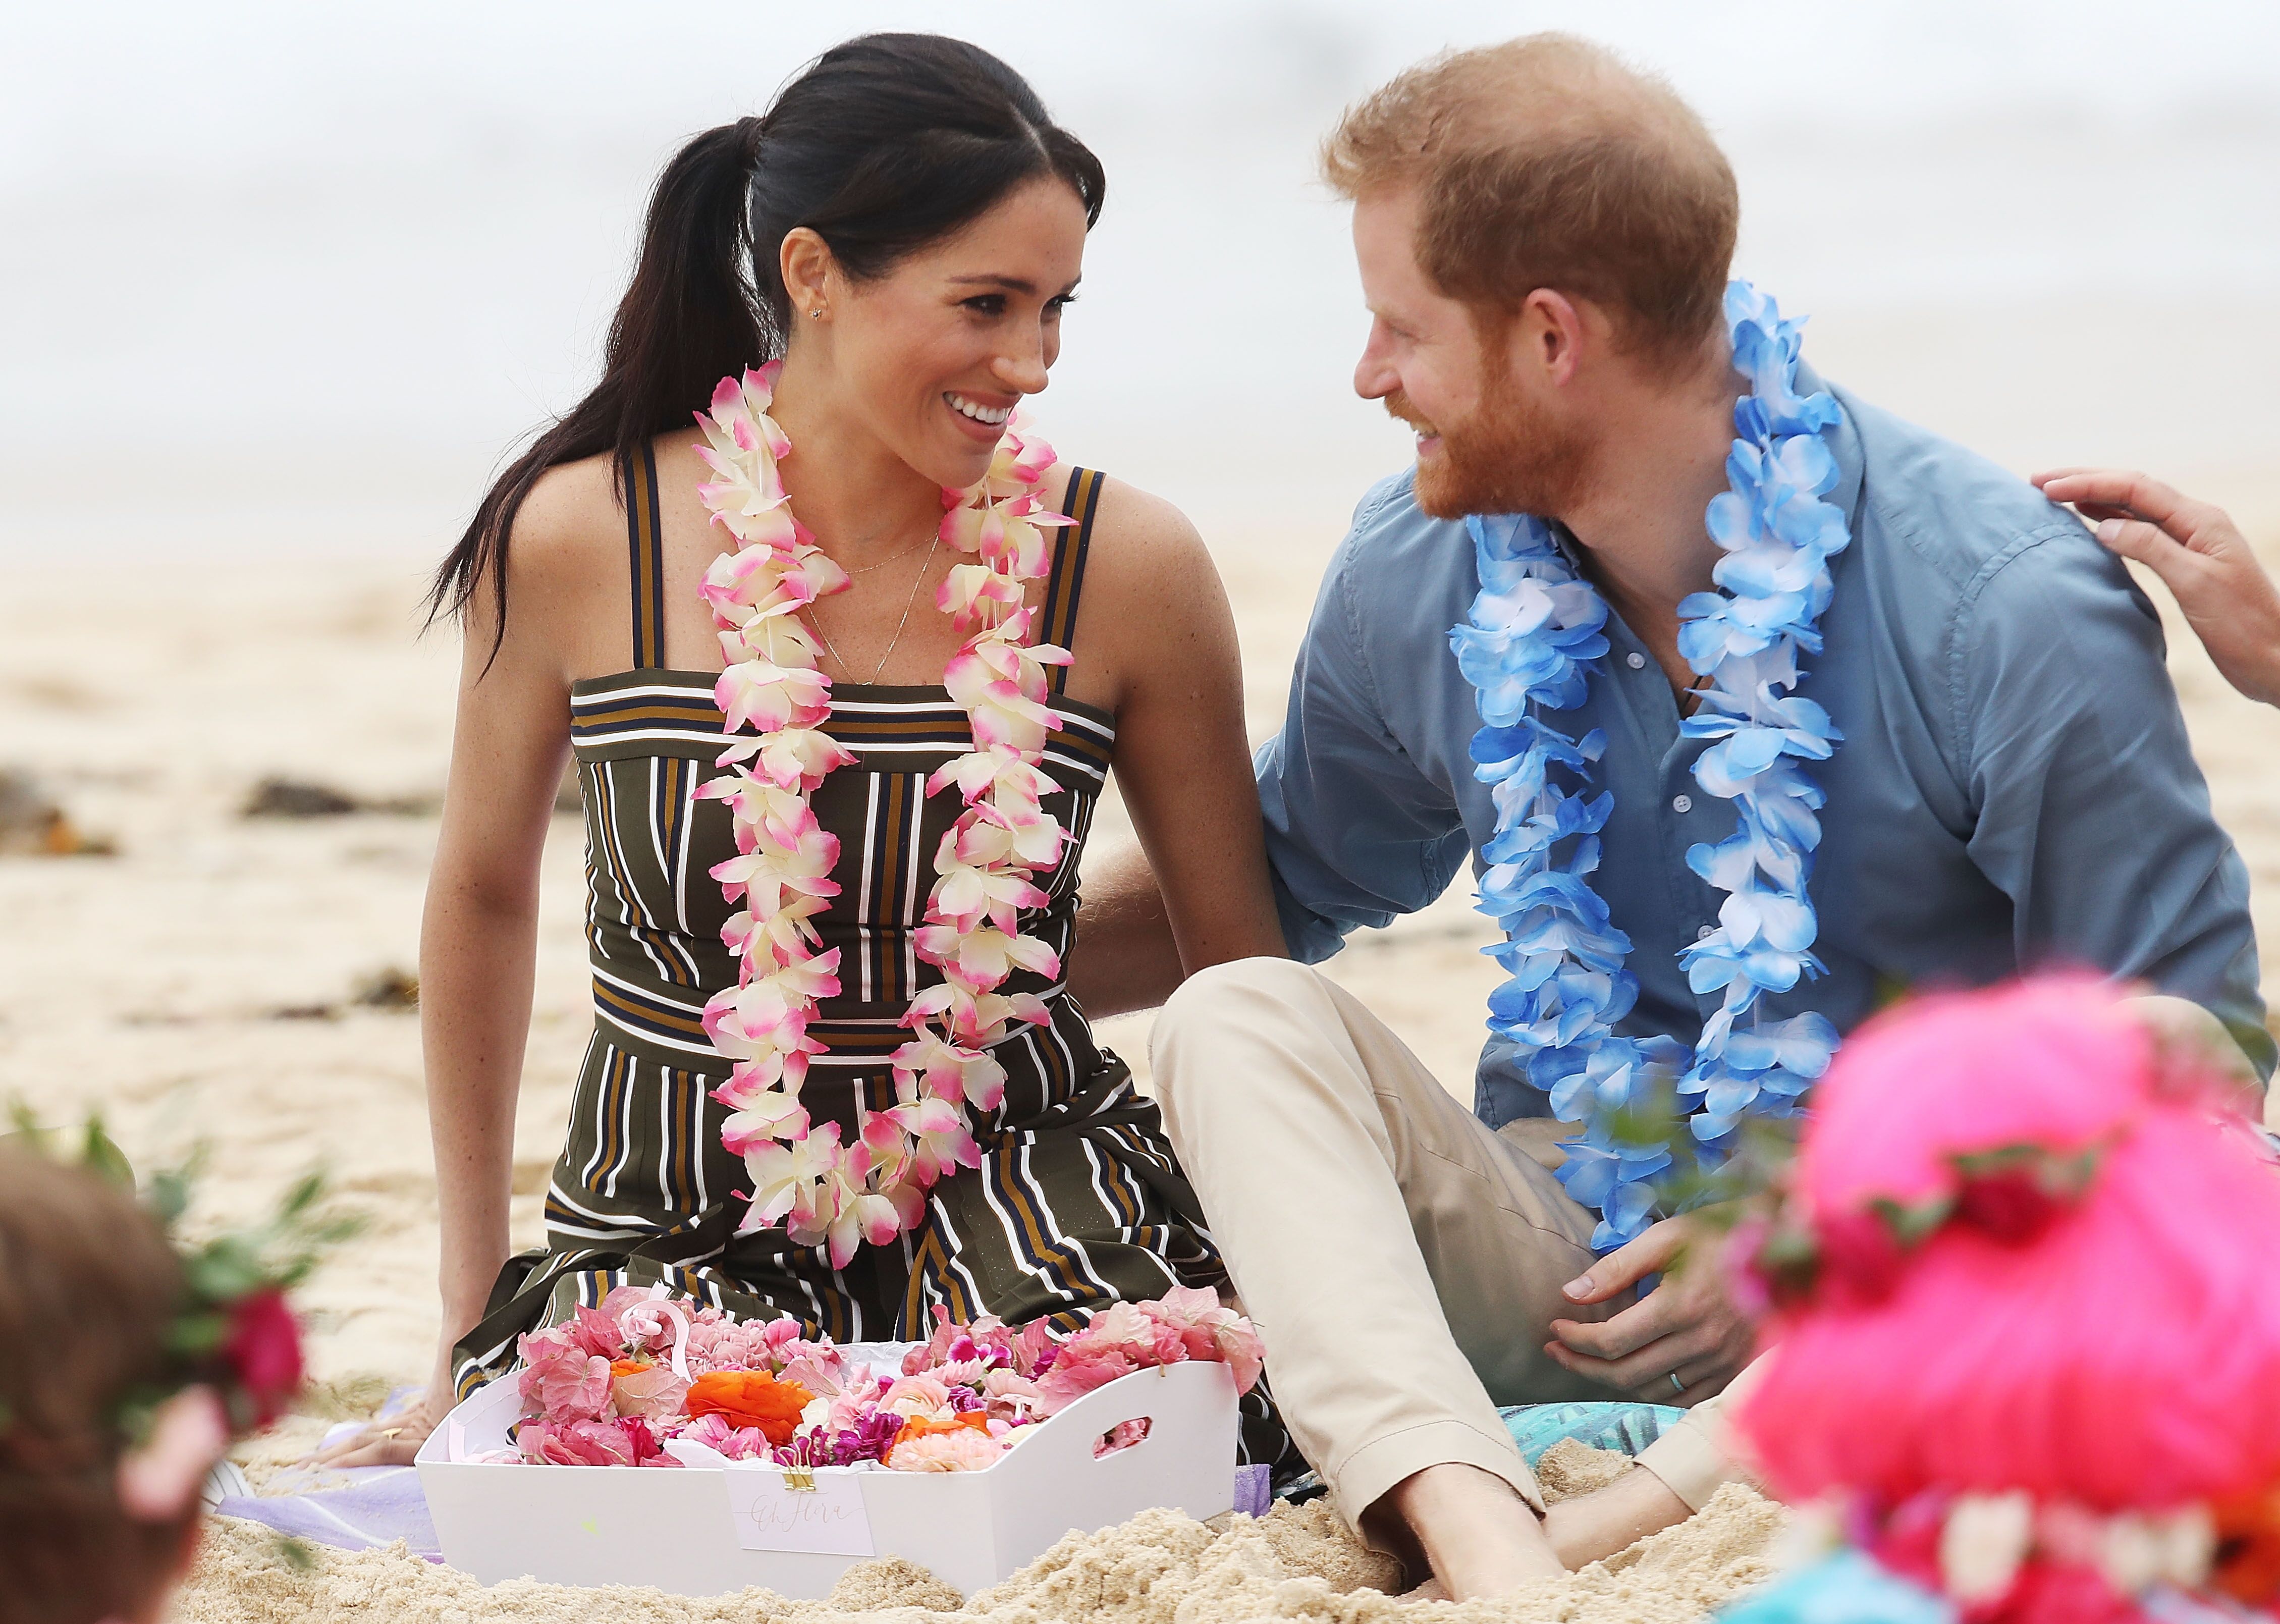 Meghan Markle and Prince Harry during a trip to the beach | Source: Getty Images/GlobalImagesUkraine